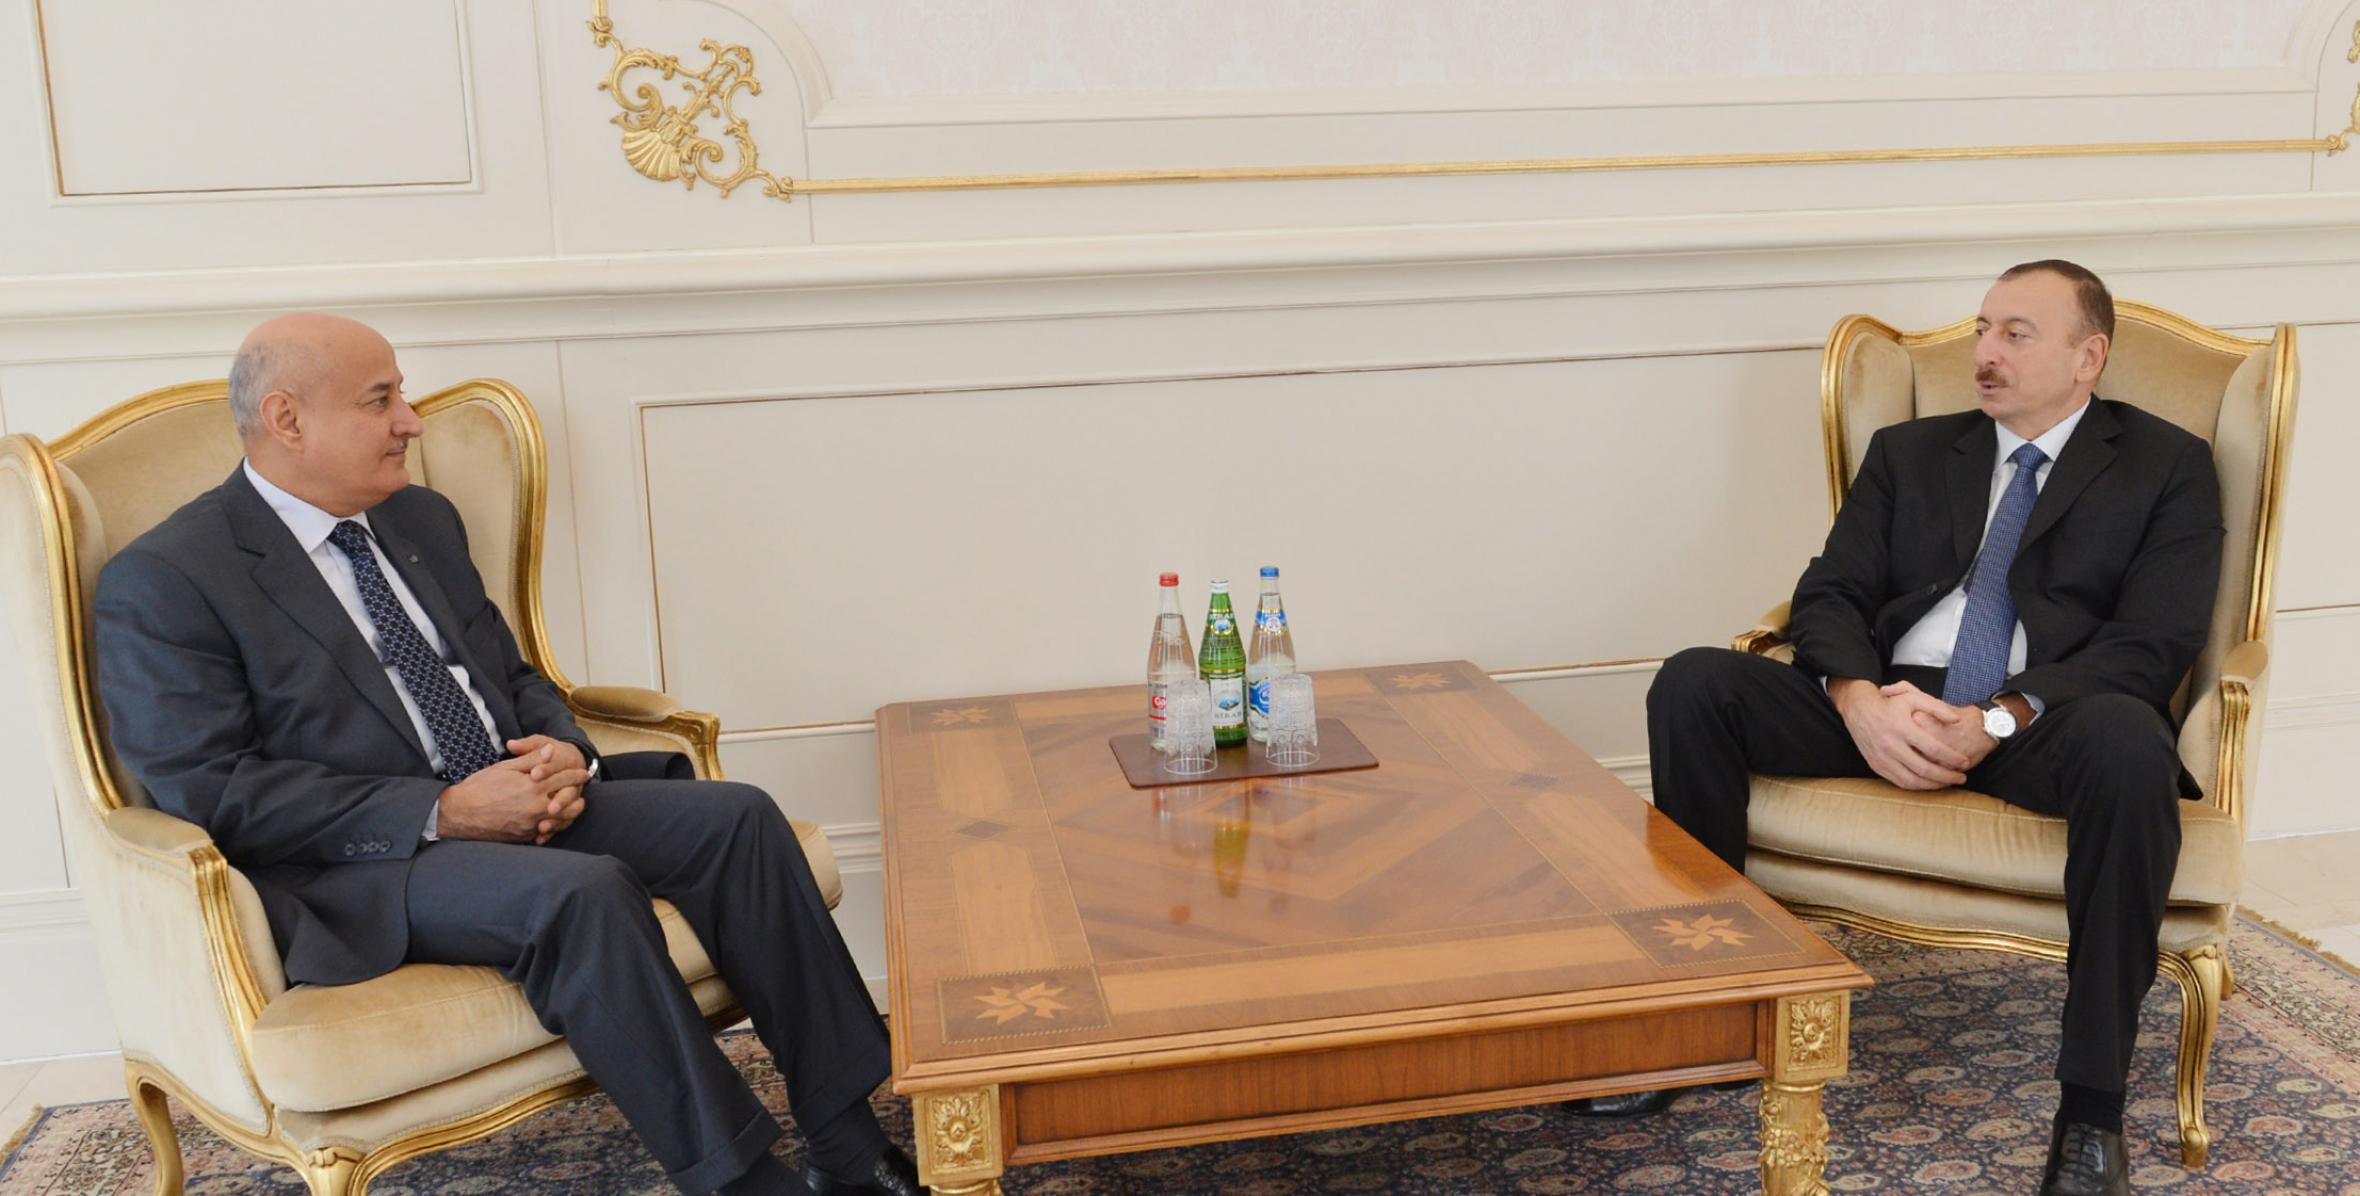 Ilham Aliyev received the ISESCO Director General